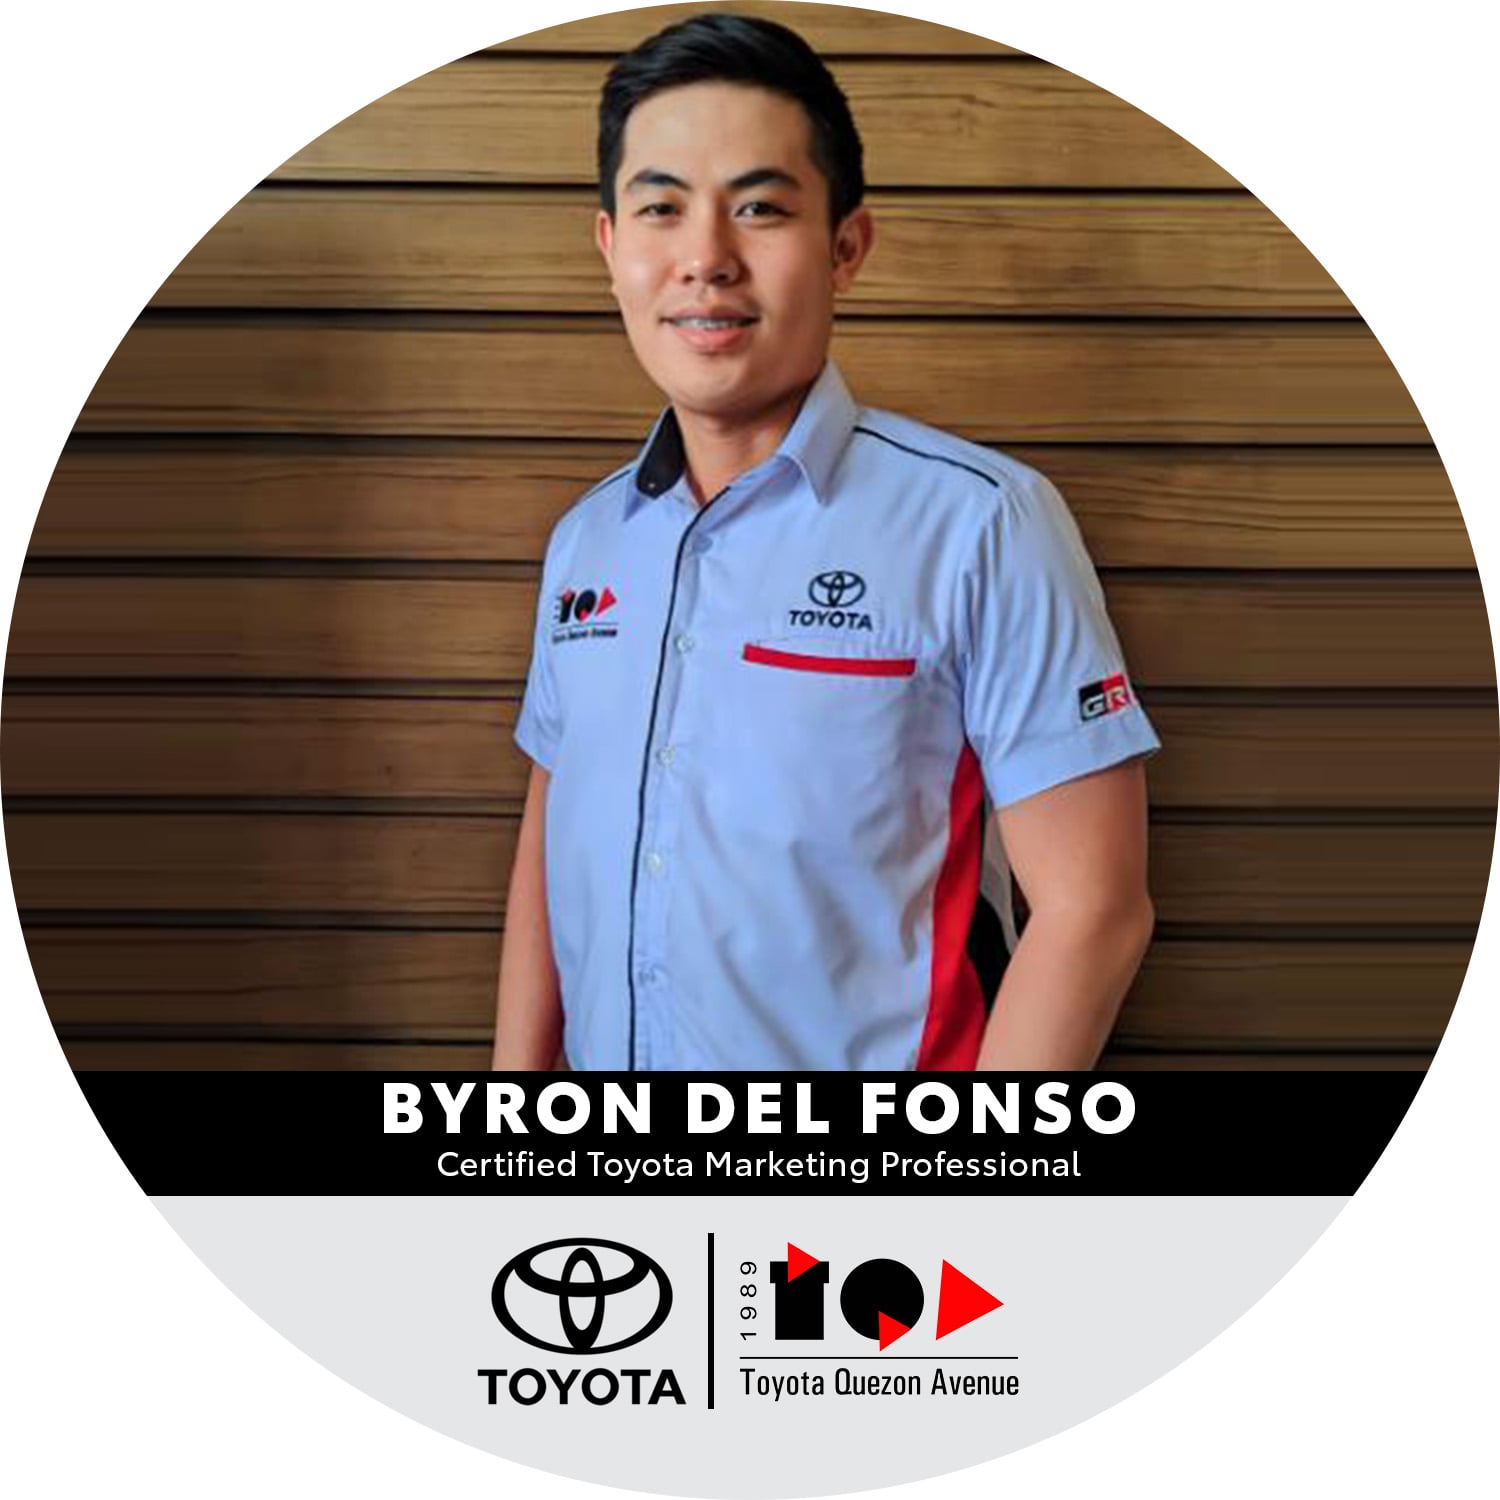 Certified Toyota Marketing Professionals - Byron Del Fonso